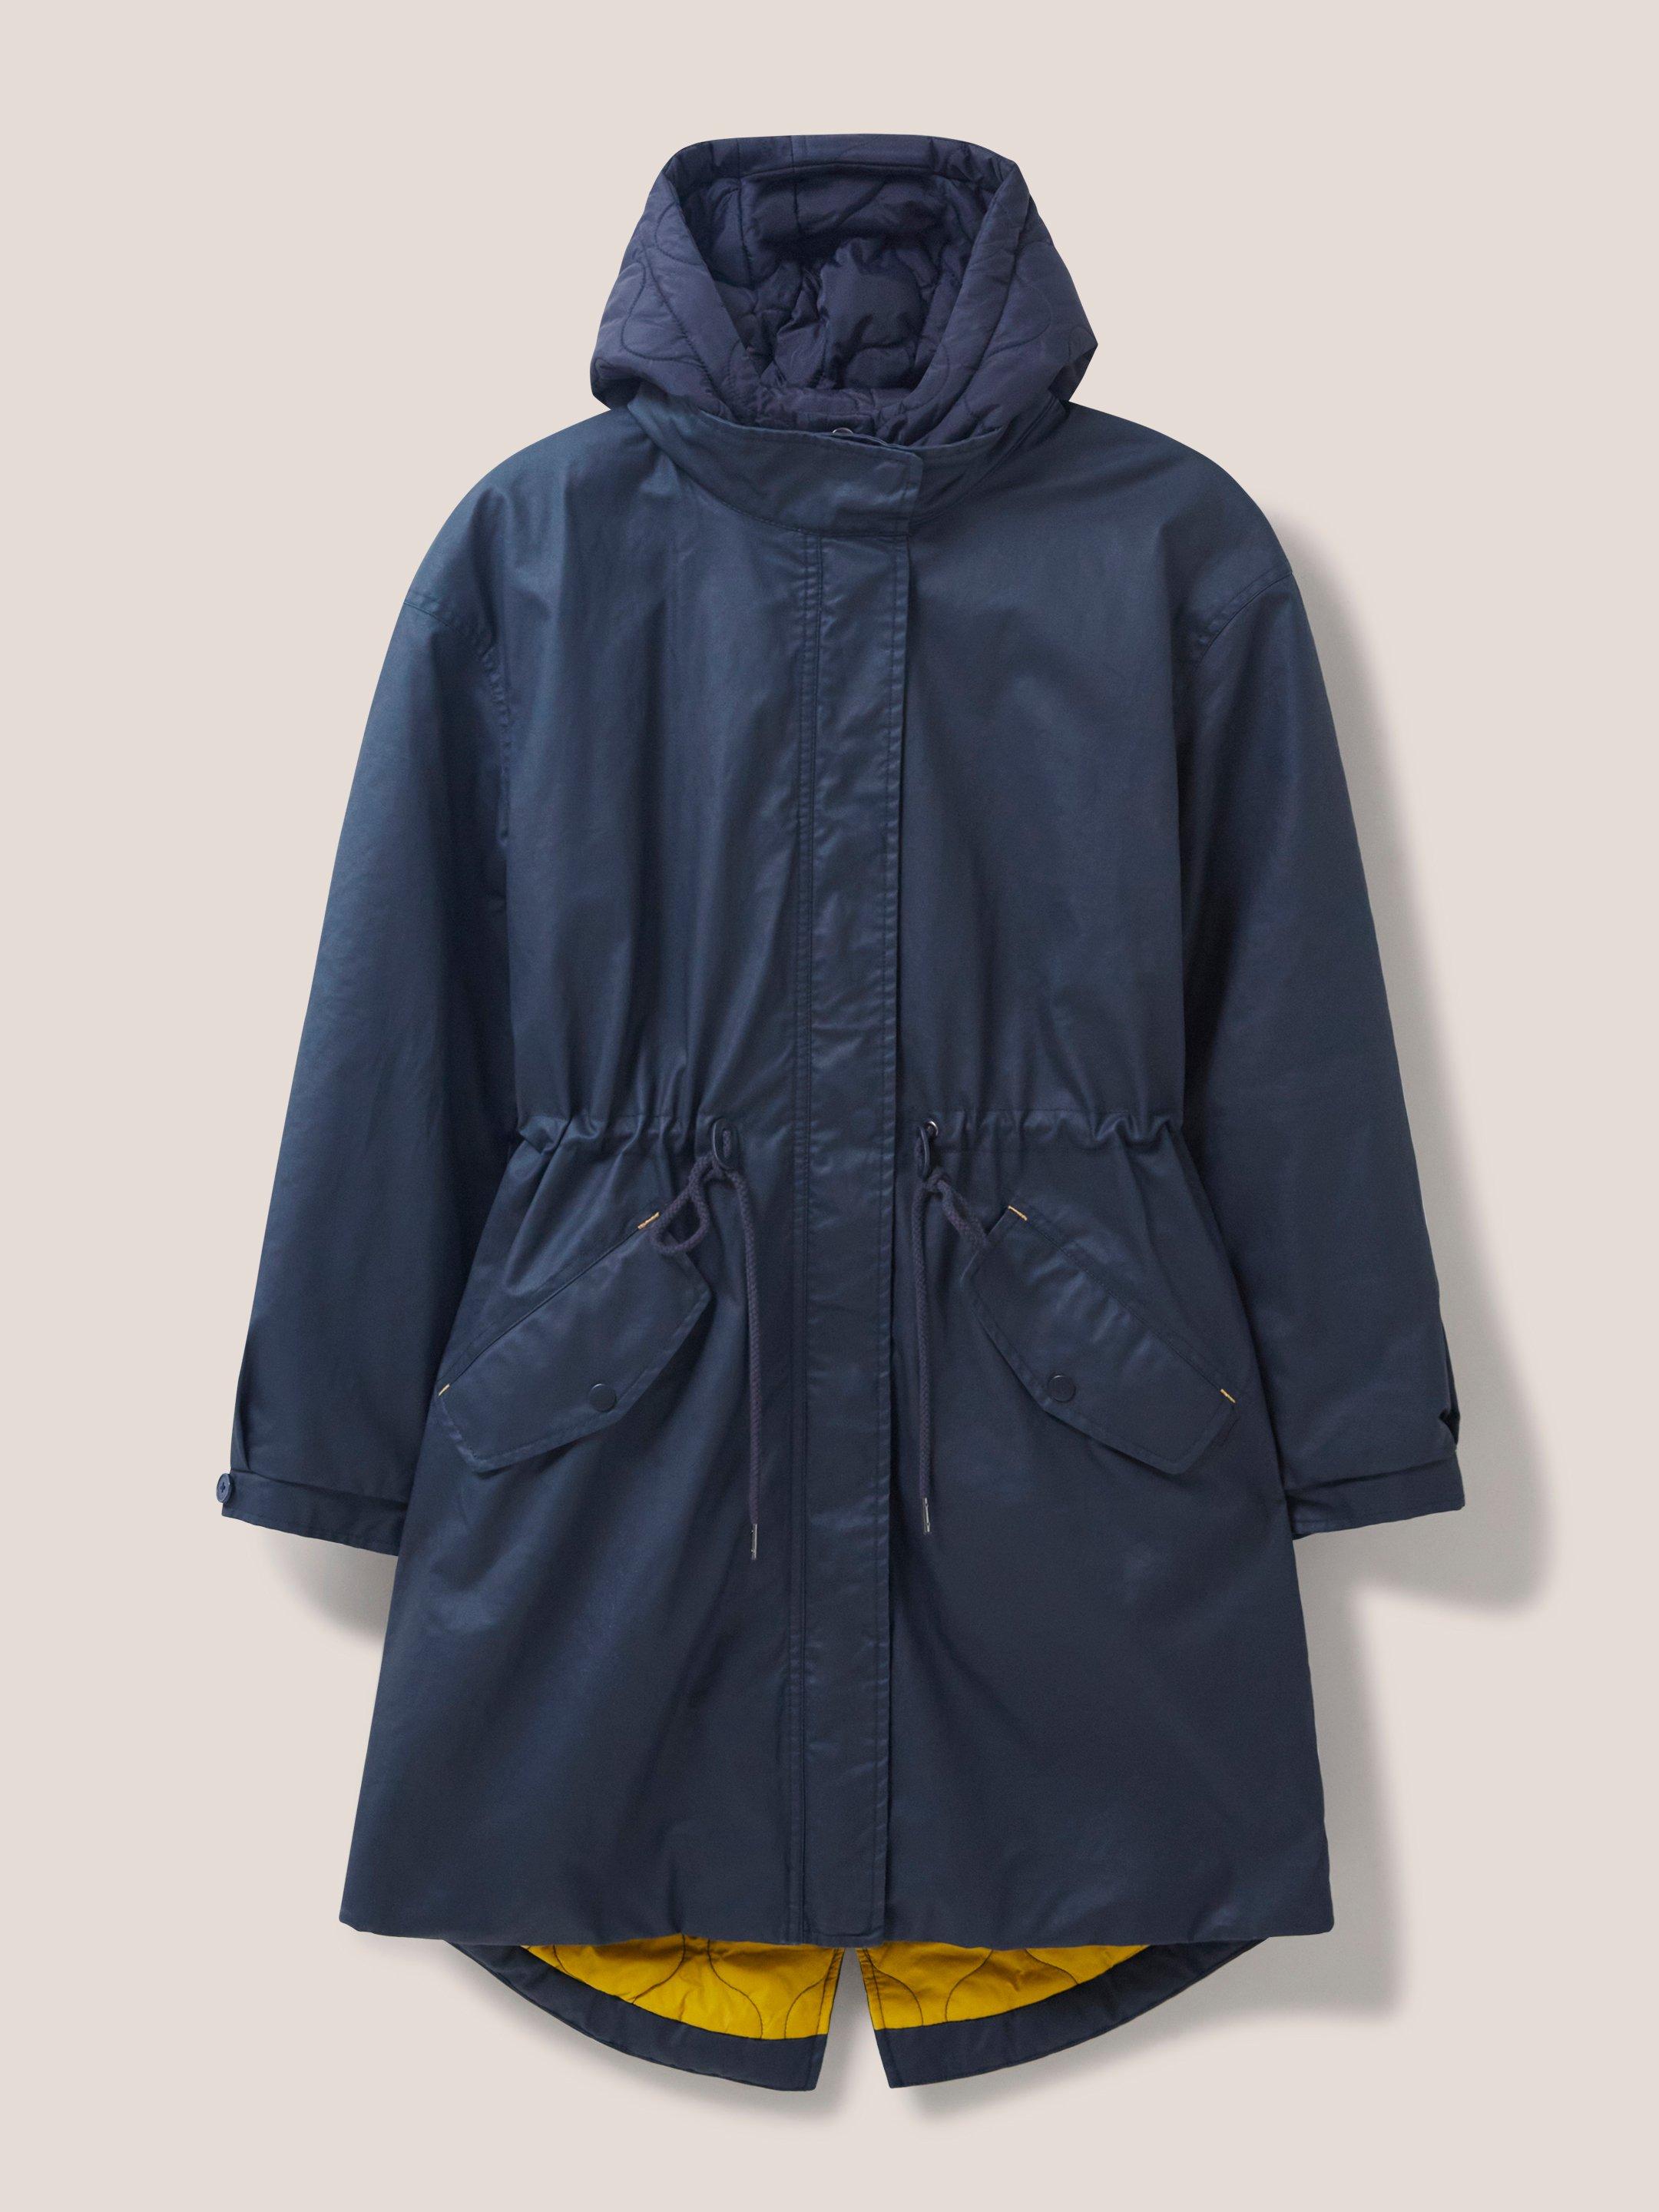 Riley Coated Cotton Parka in DARK NAVY - FLAT FRONT